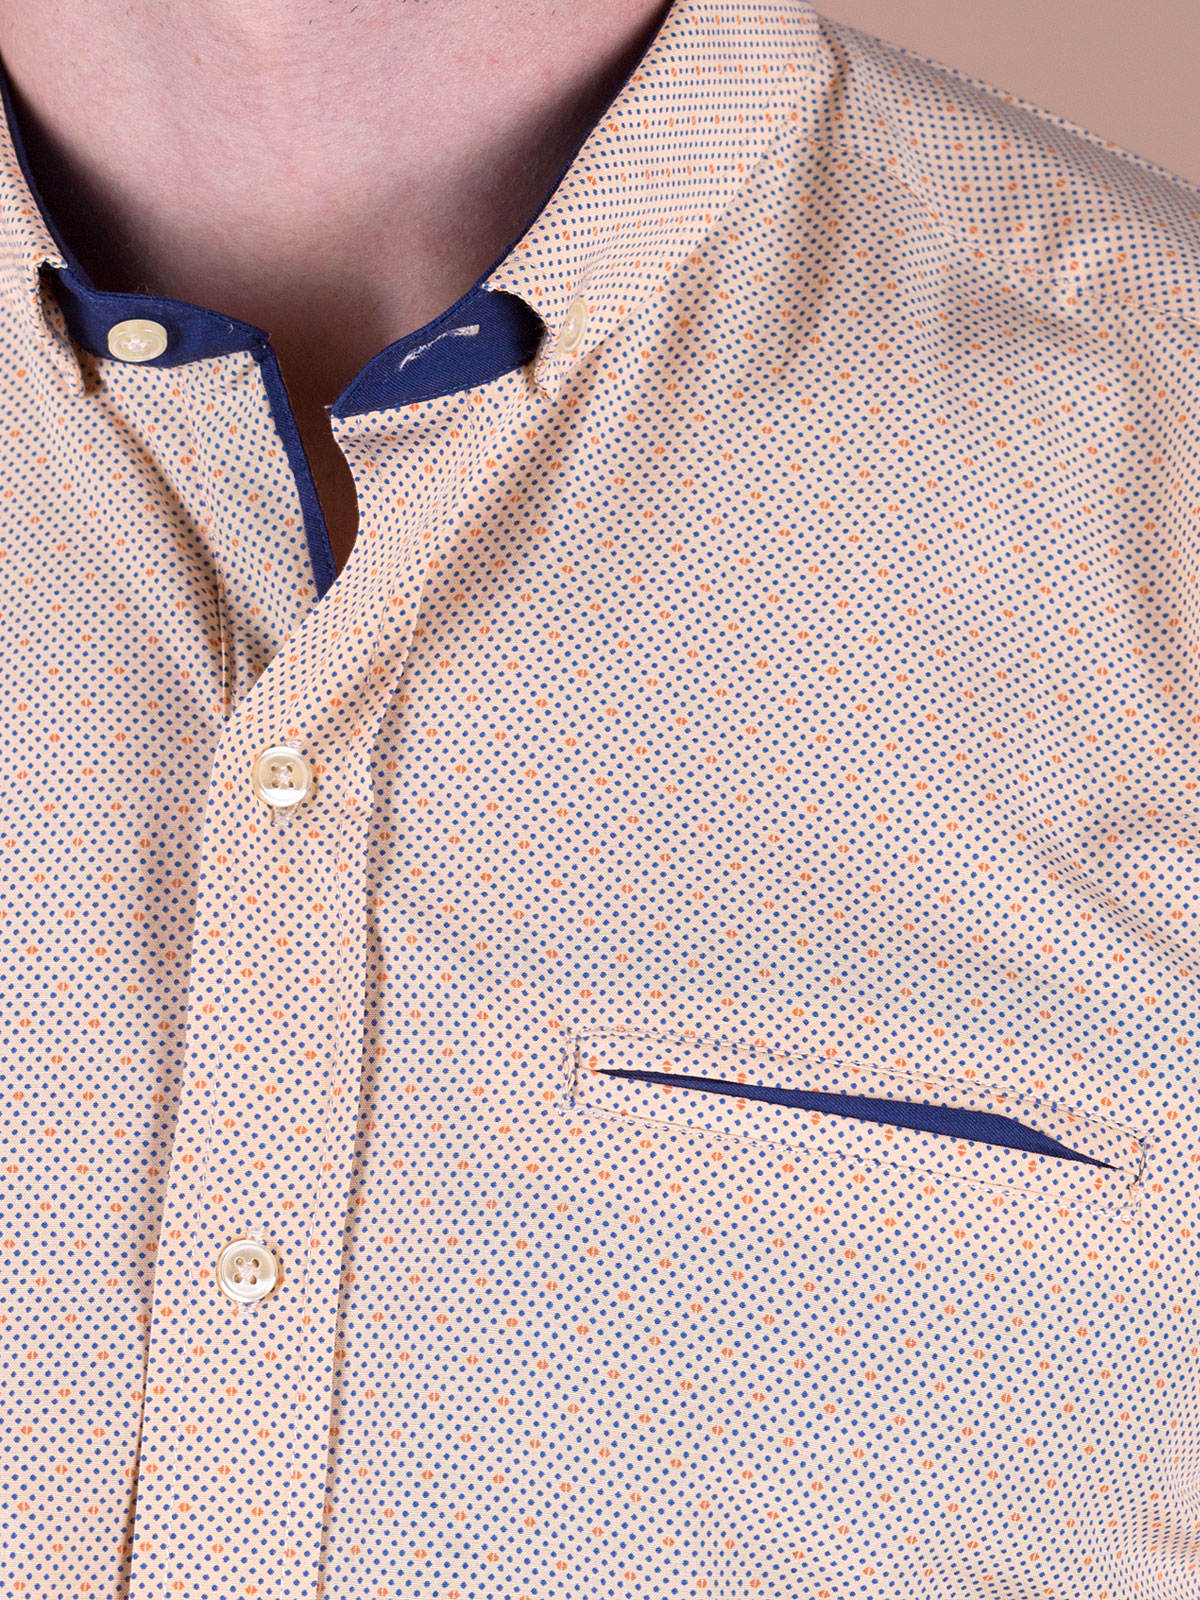 Shirt in pale orange with fine dots - 21396 € 16.31 img2